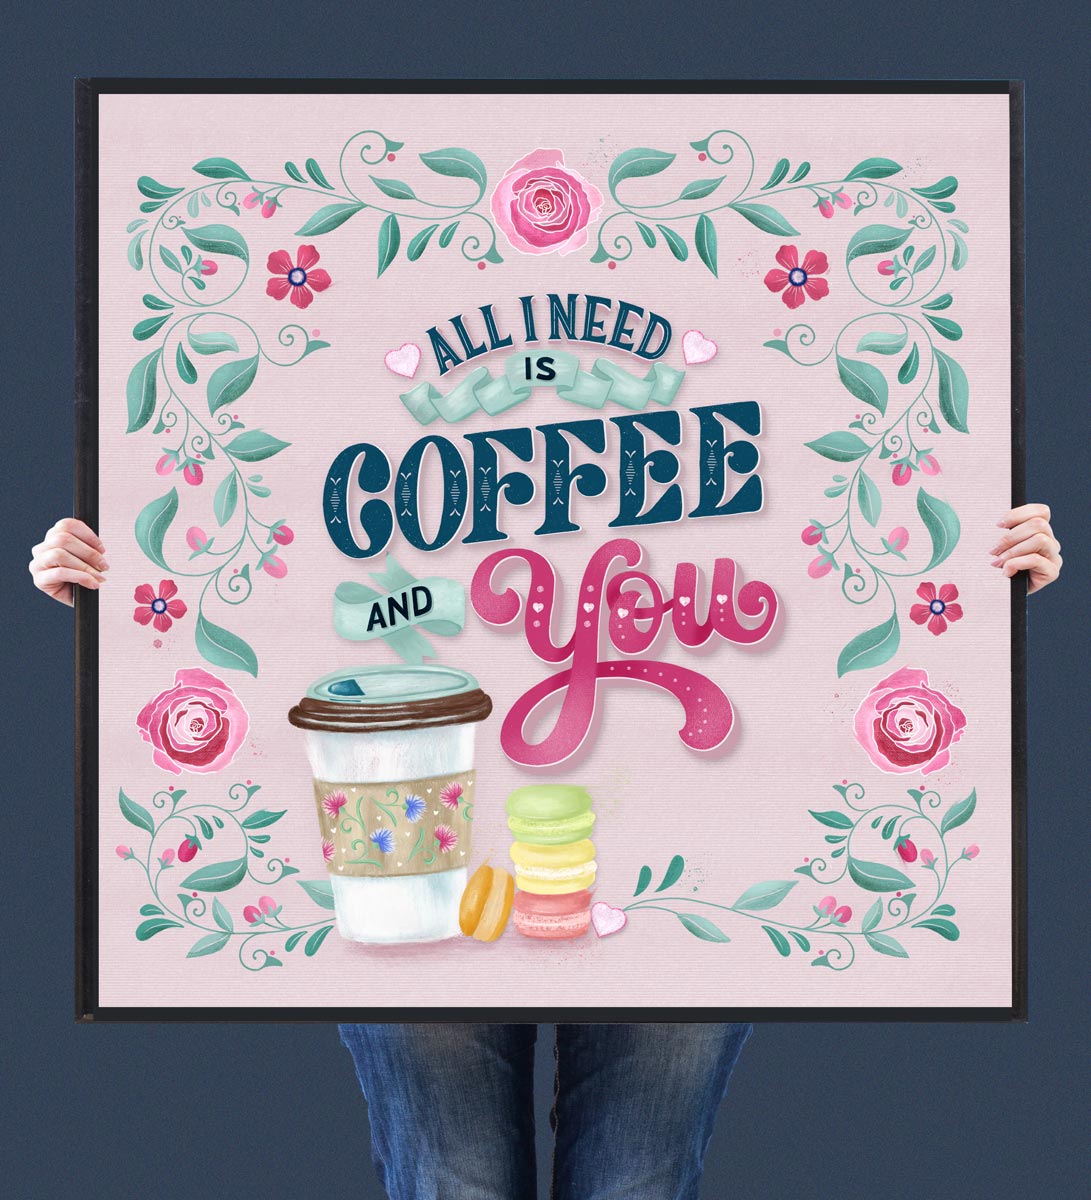 CalliLetters-Lettering-Illustration-All-I-Need-is-Coffee-and-You-Sandra-Brezina-Wien